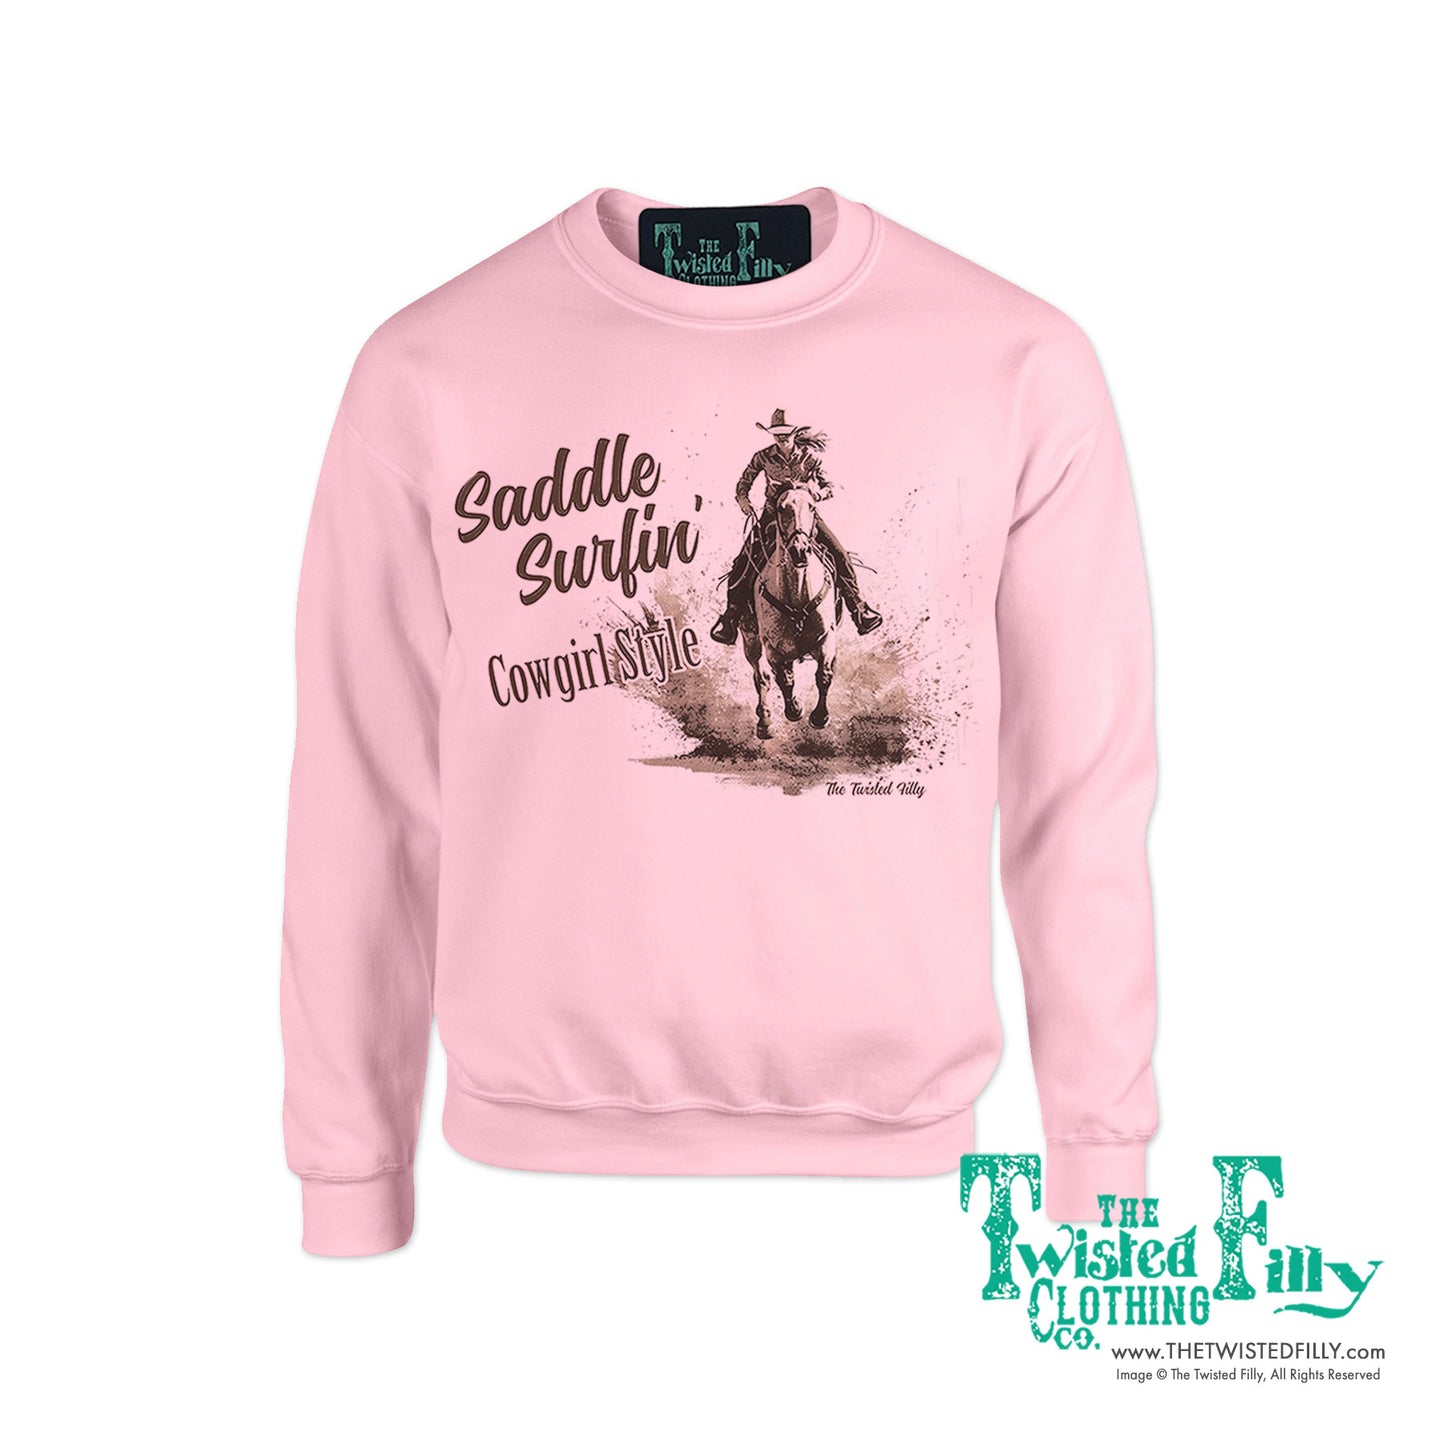 Saddle Surfin' Cowgirl Style - Adult Womens Sweatshirt - Assorted Colors